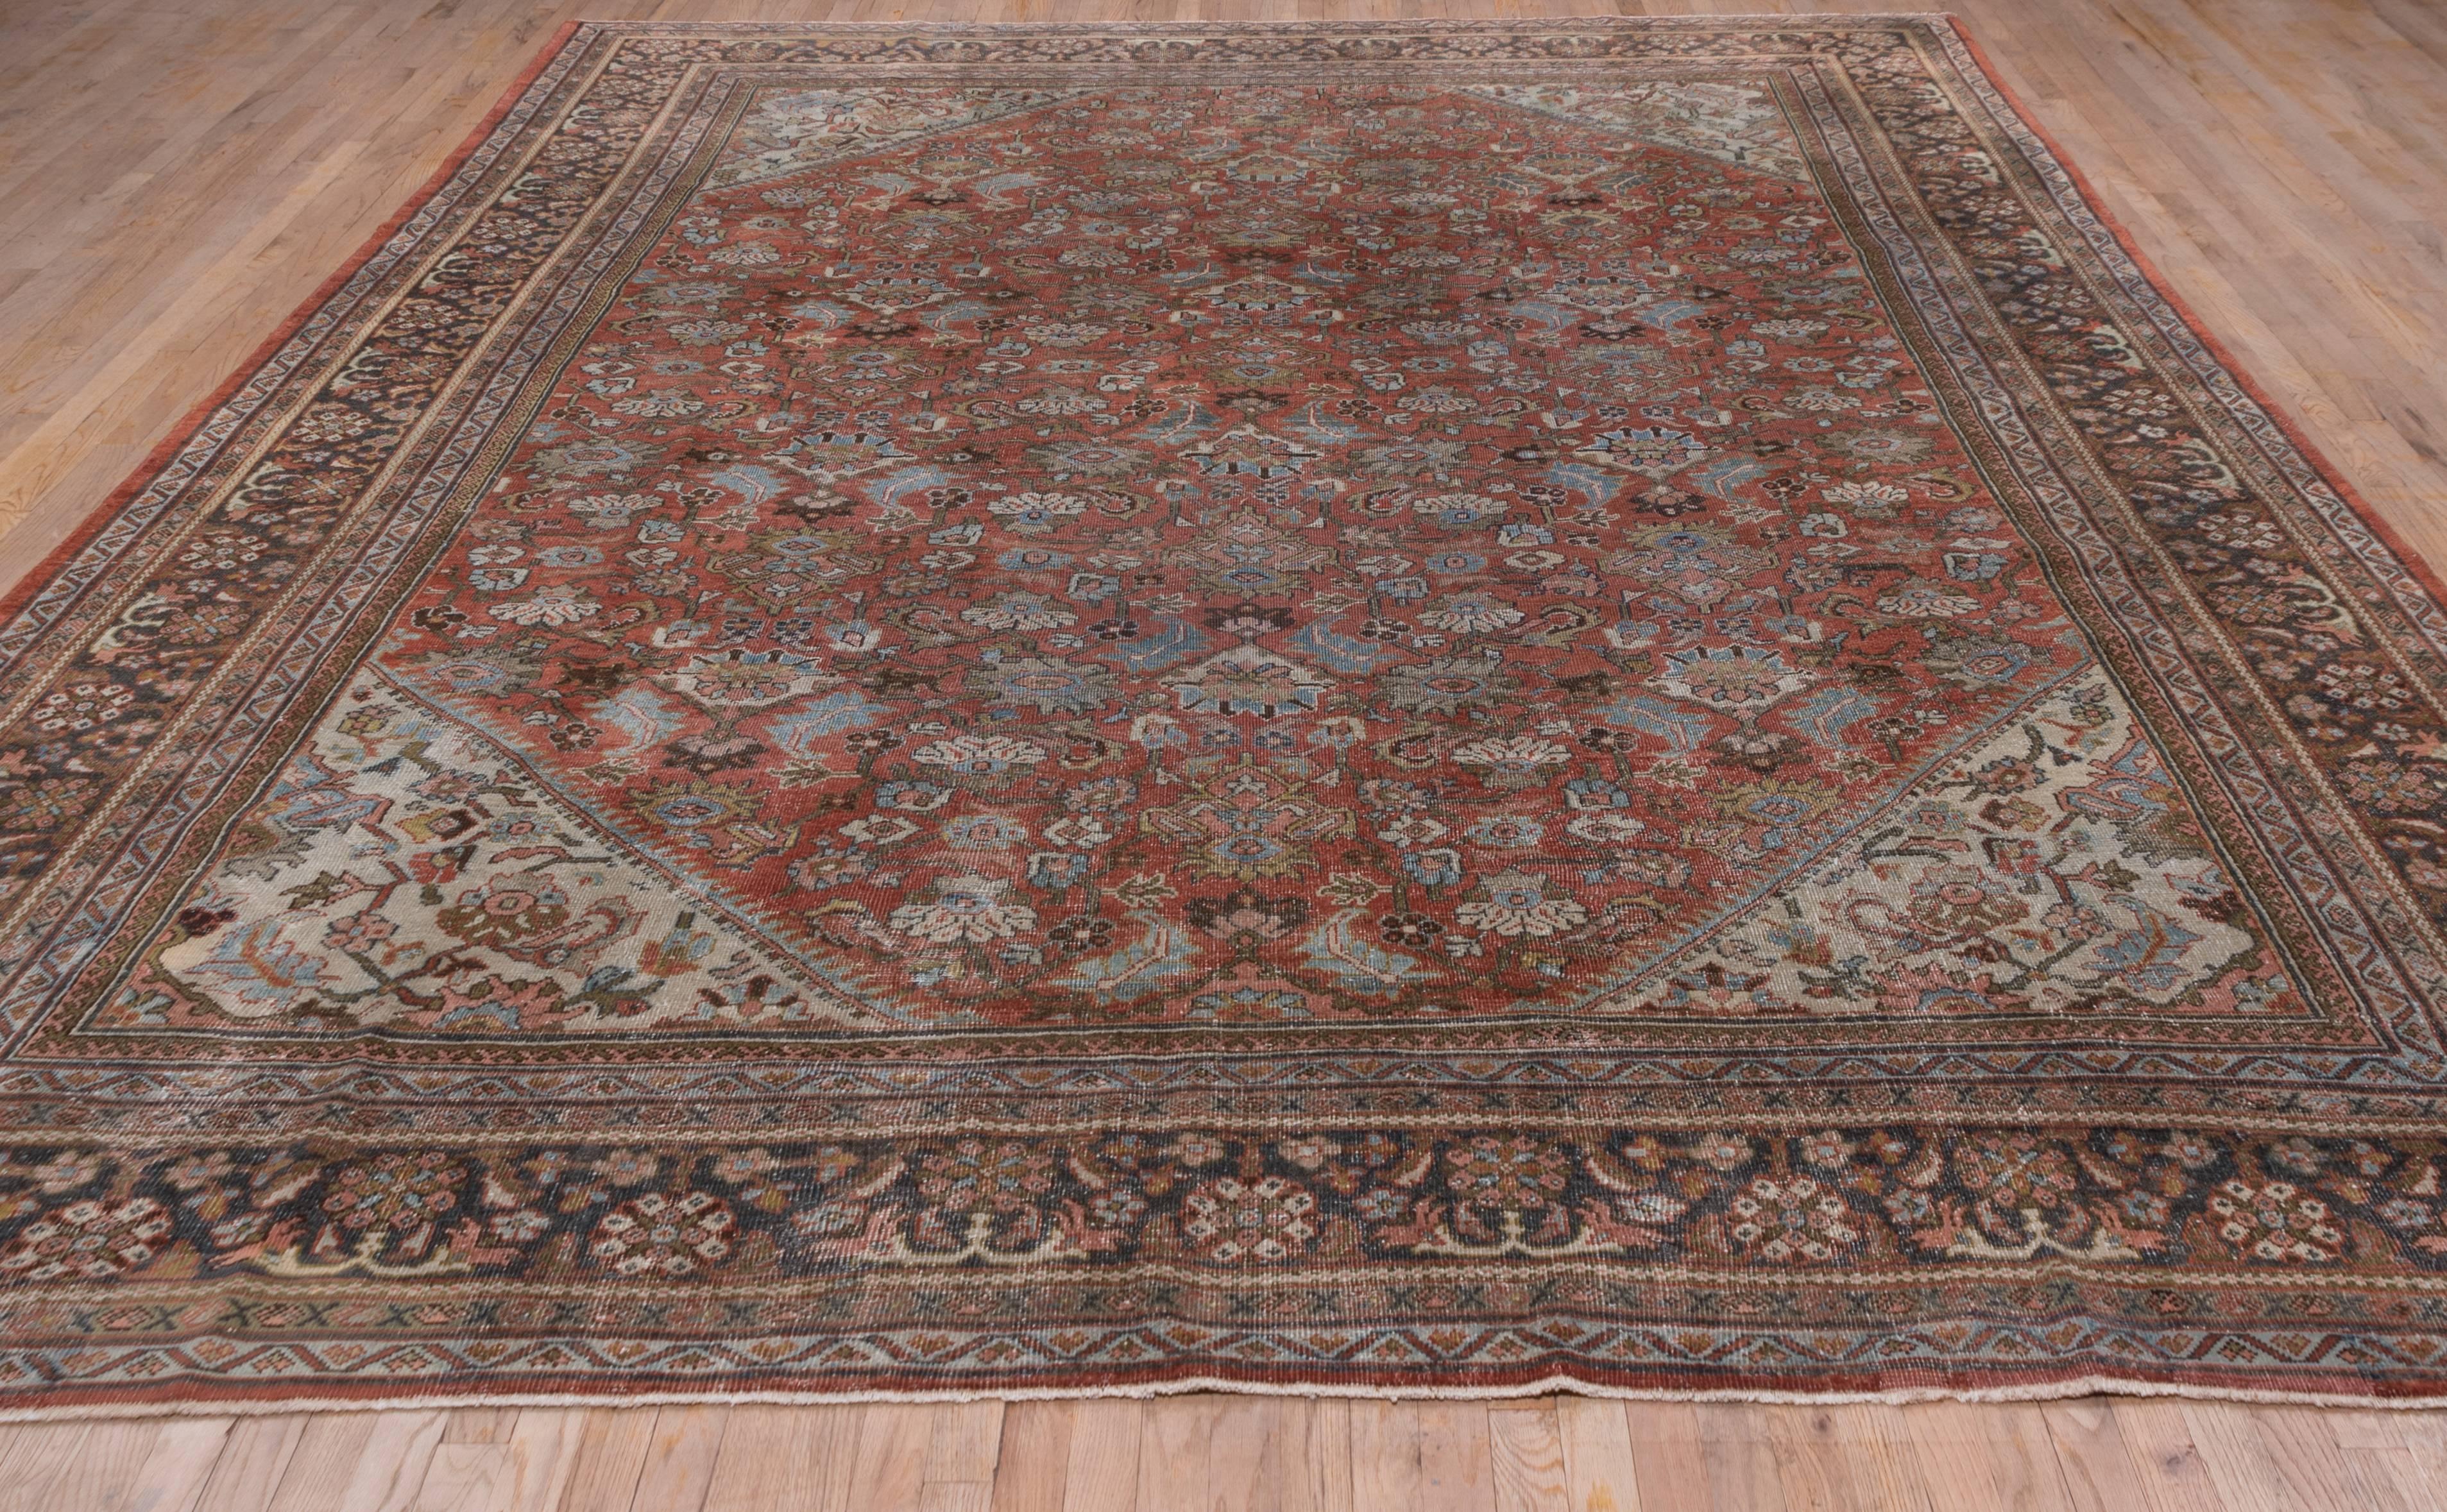 Hand-Knotted Antique Persian Mahal Carpet, Circa 1920s